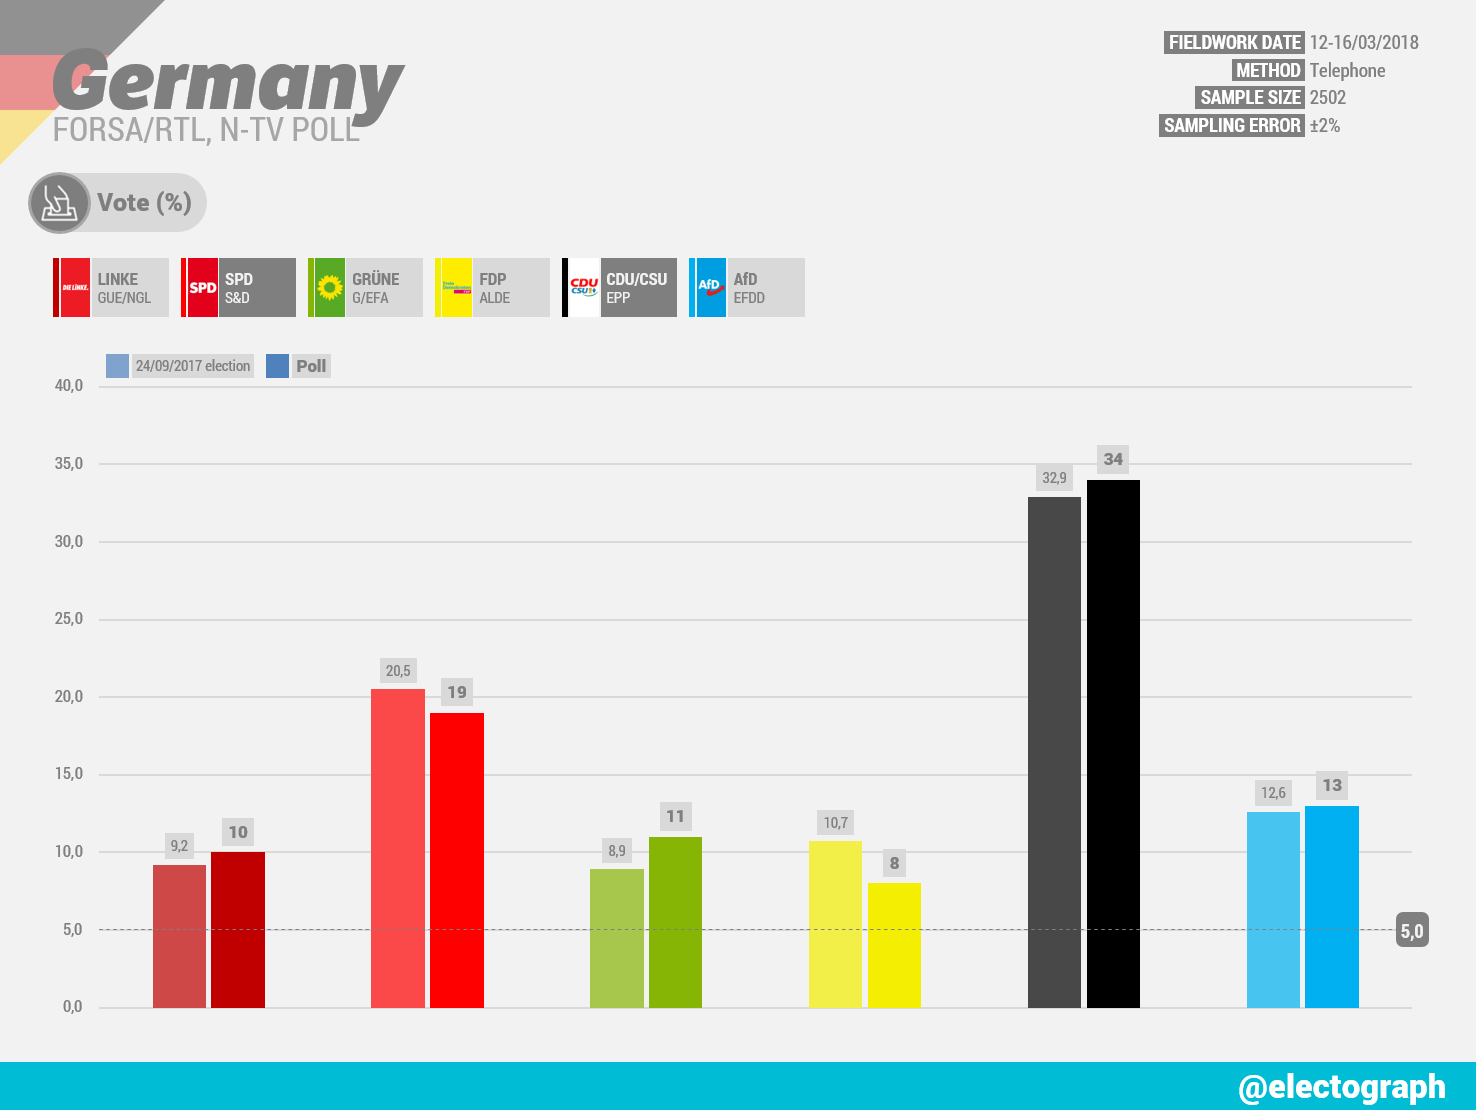 GERMANY Forsa poll chart for RTL and n-tv, March 2018